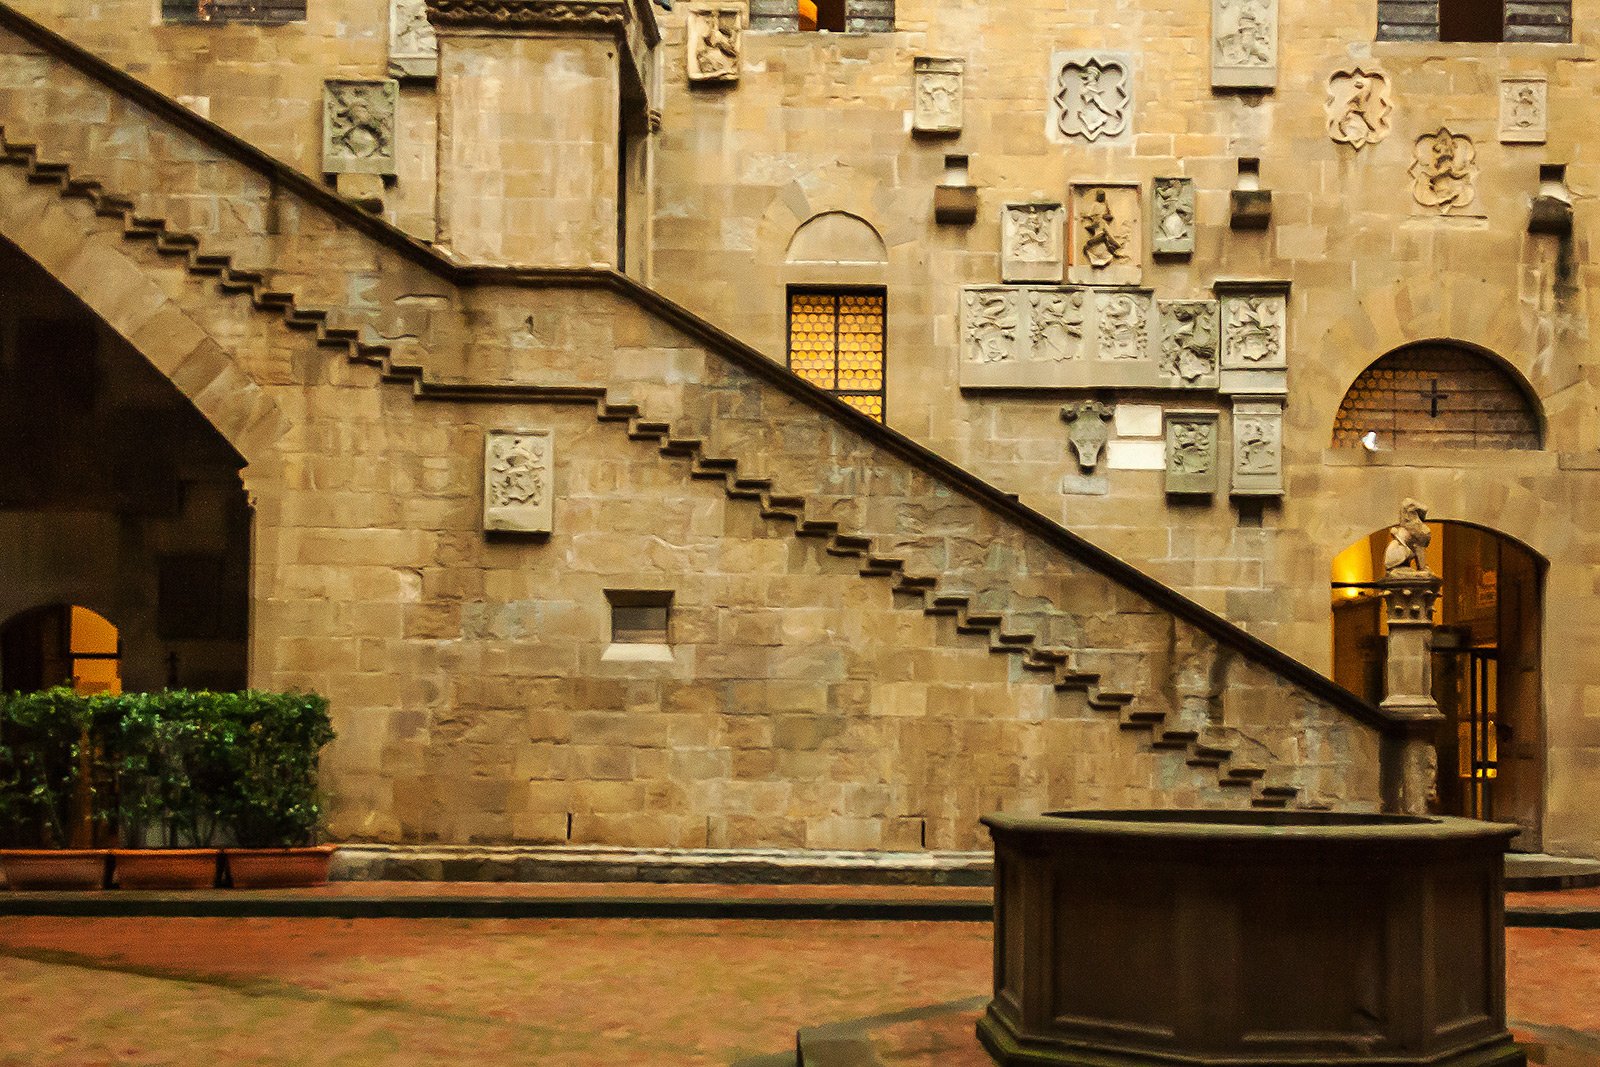 National Museum of Bargello, Florence